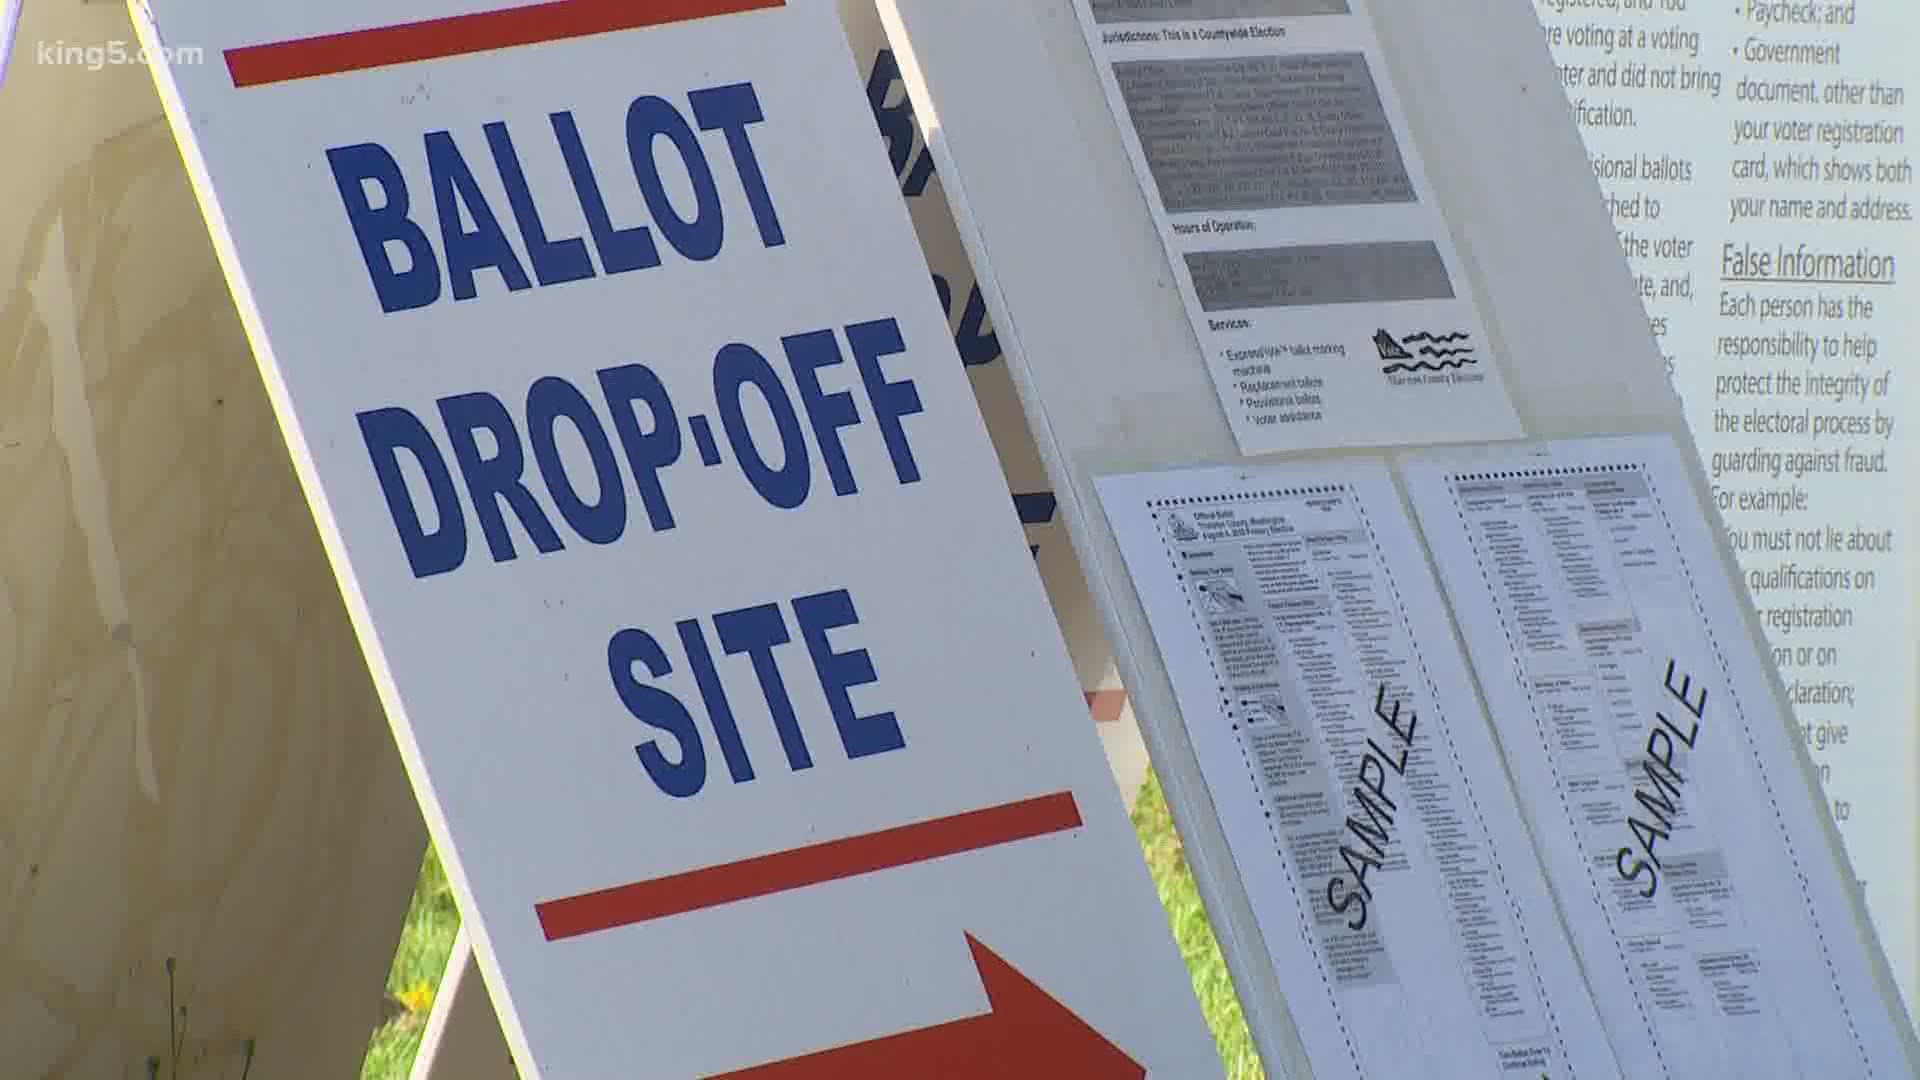 Ballot envelopes don't need to be licked, workers are on two shifts and a drive-through voter registration service are just some of the changes put in place.